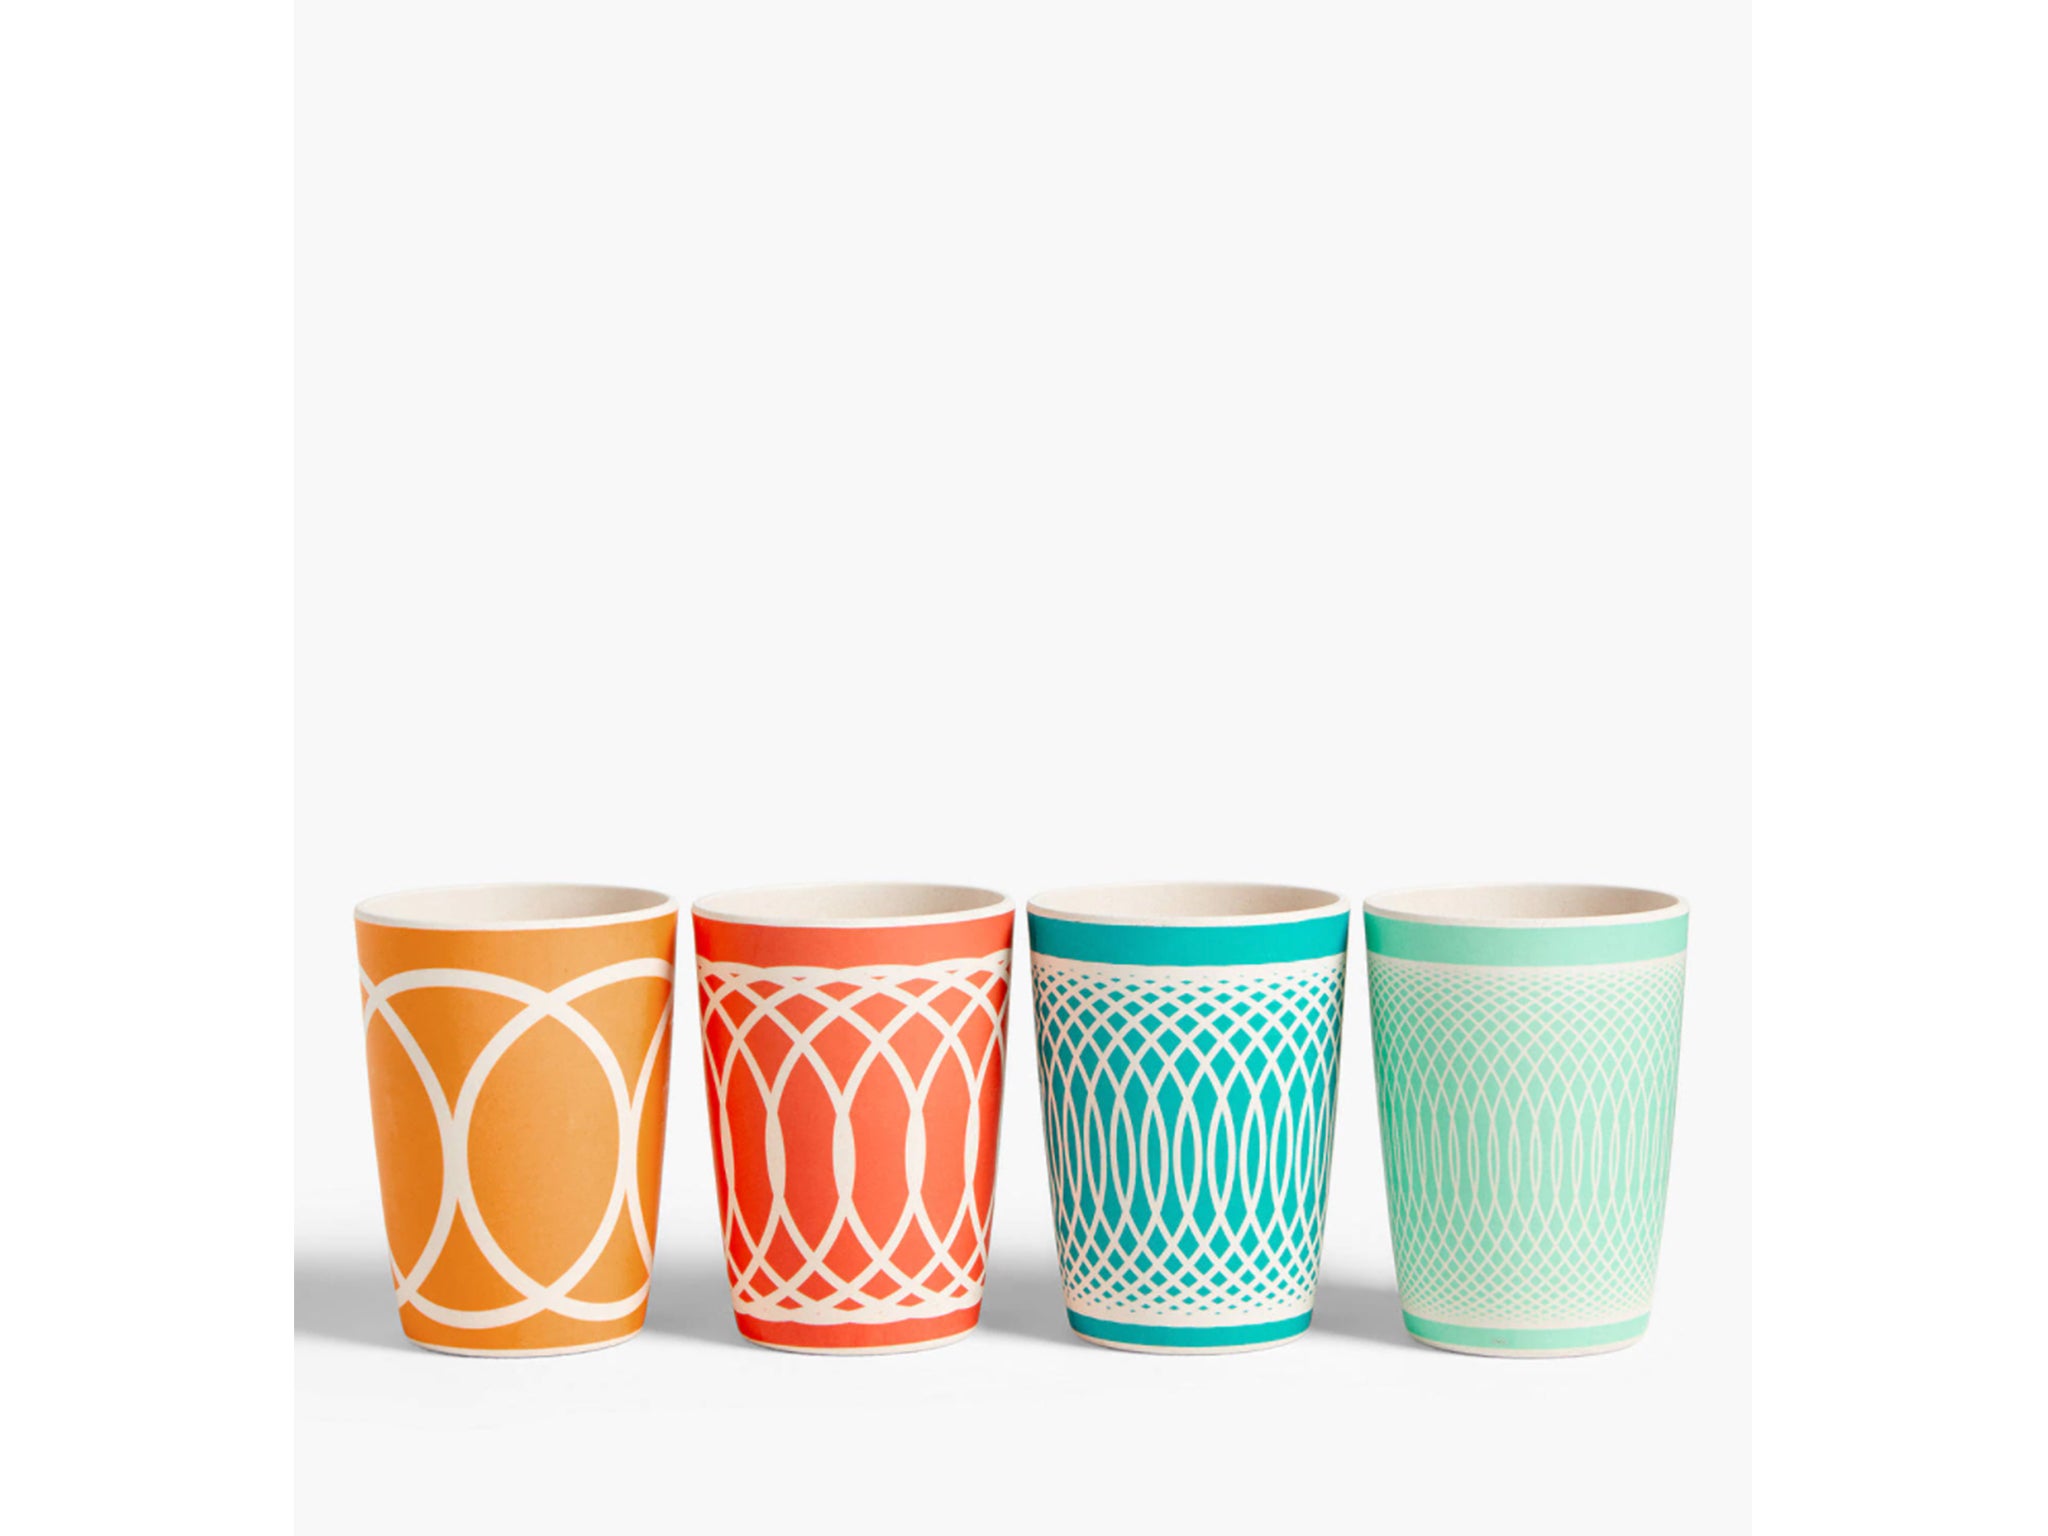 Sip on your prosecco or smoothies in this colourful set of tumblers